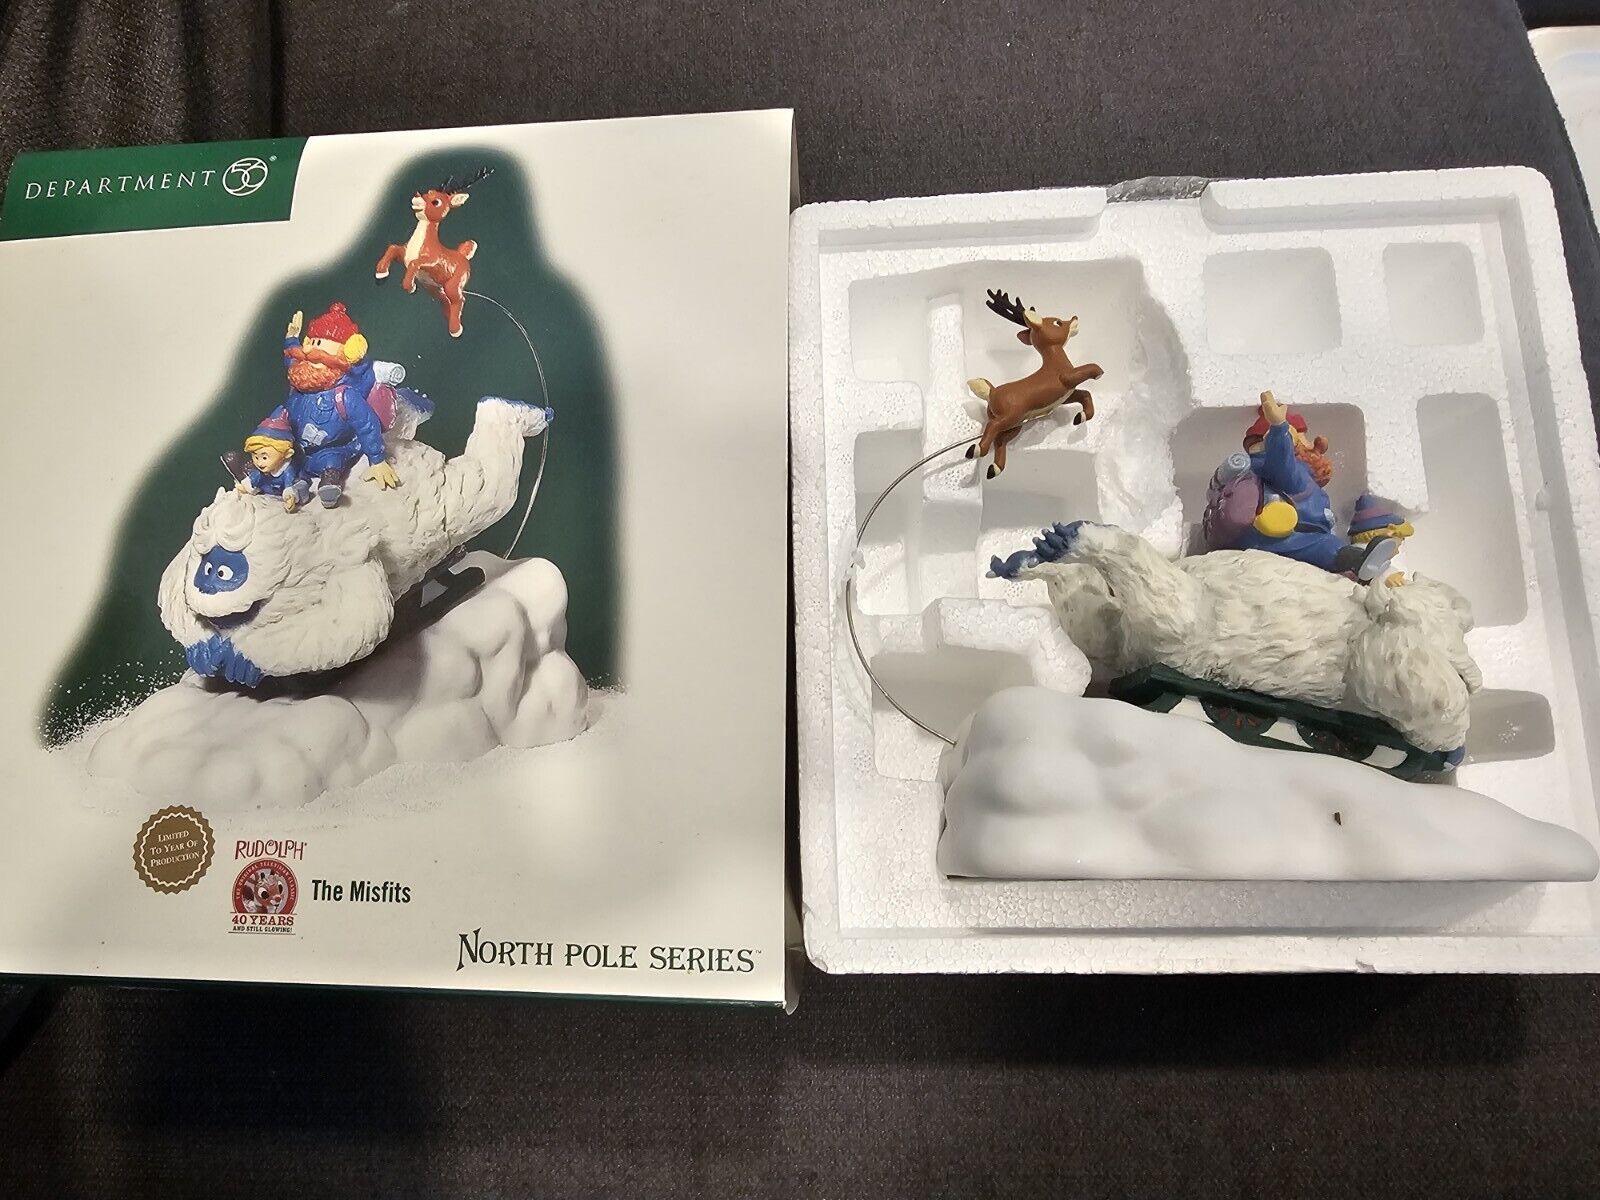 Dept 56 Rudolph The Misfits 56860 North Pole Series Village Accessory